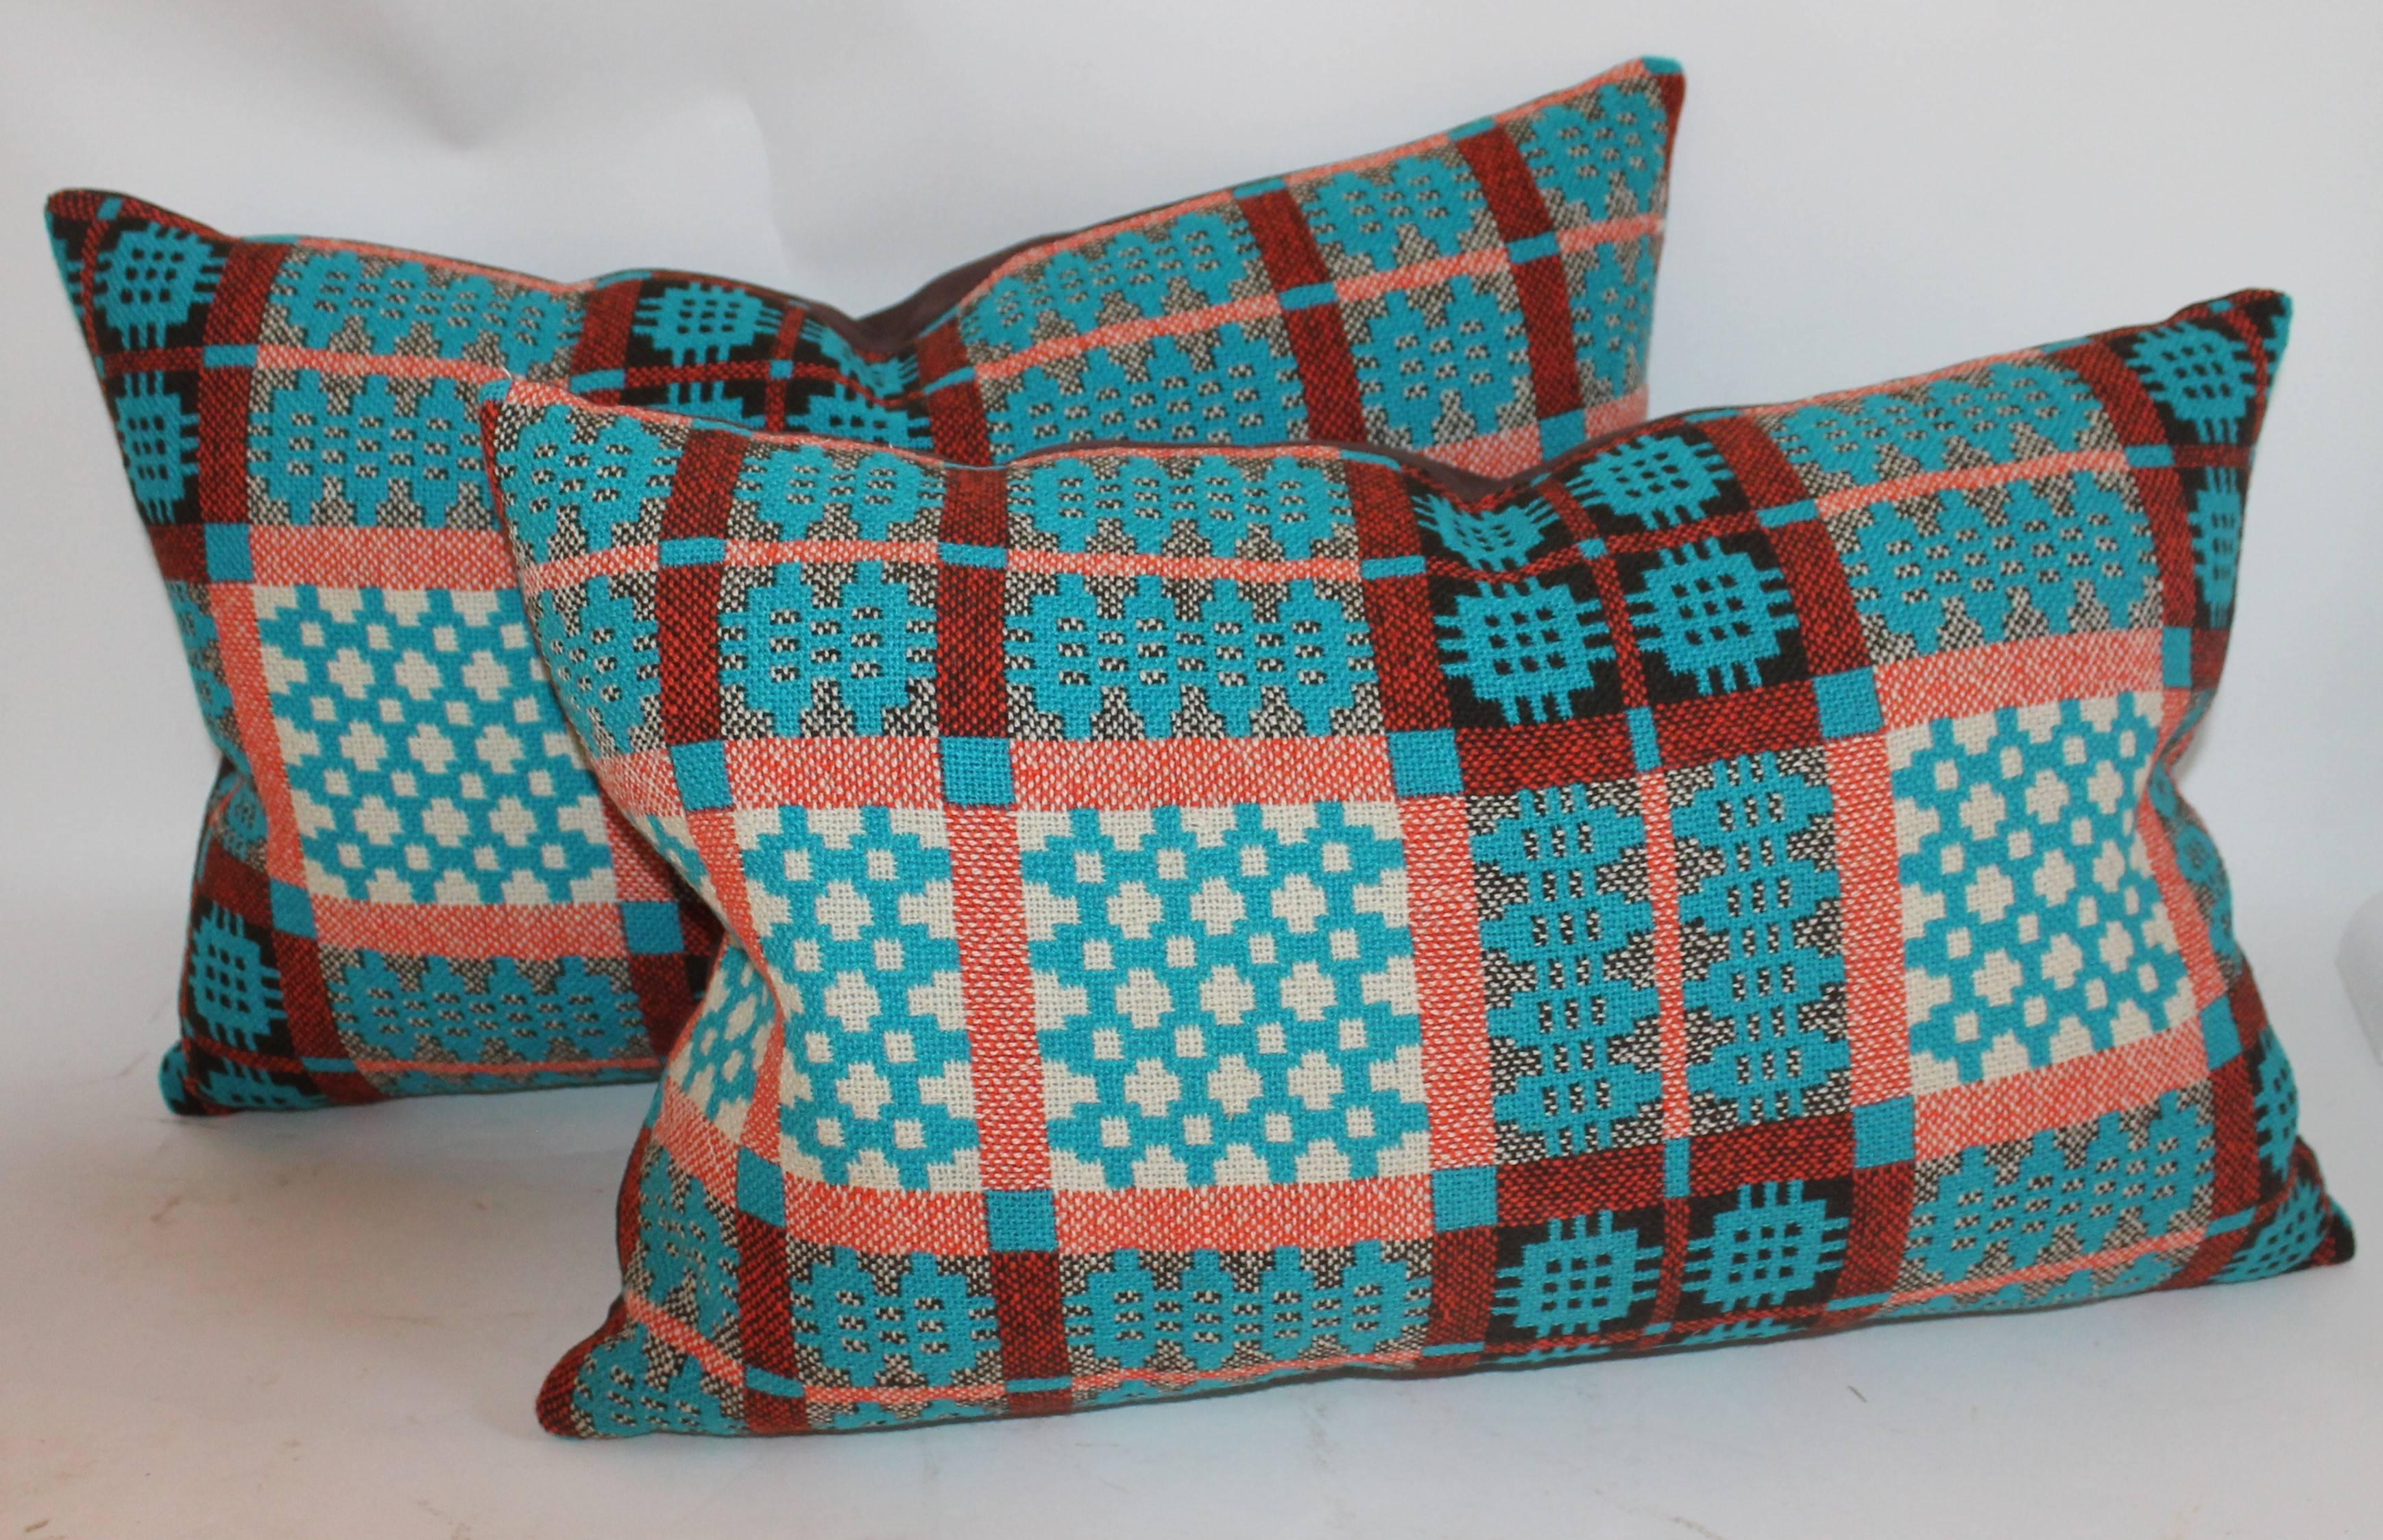 Turquoise 19th century Welsh woven coverlet pillows newly made. The condition is pristine. This is the only pair of these bolster pillows. The backing is in brown cotton linen.